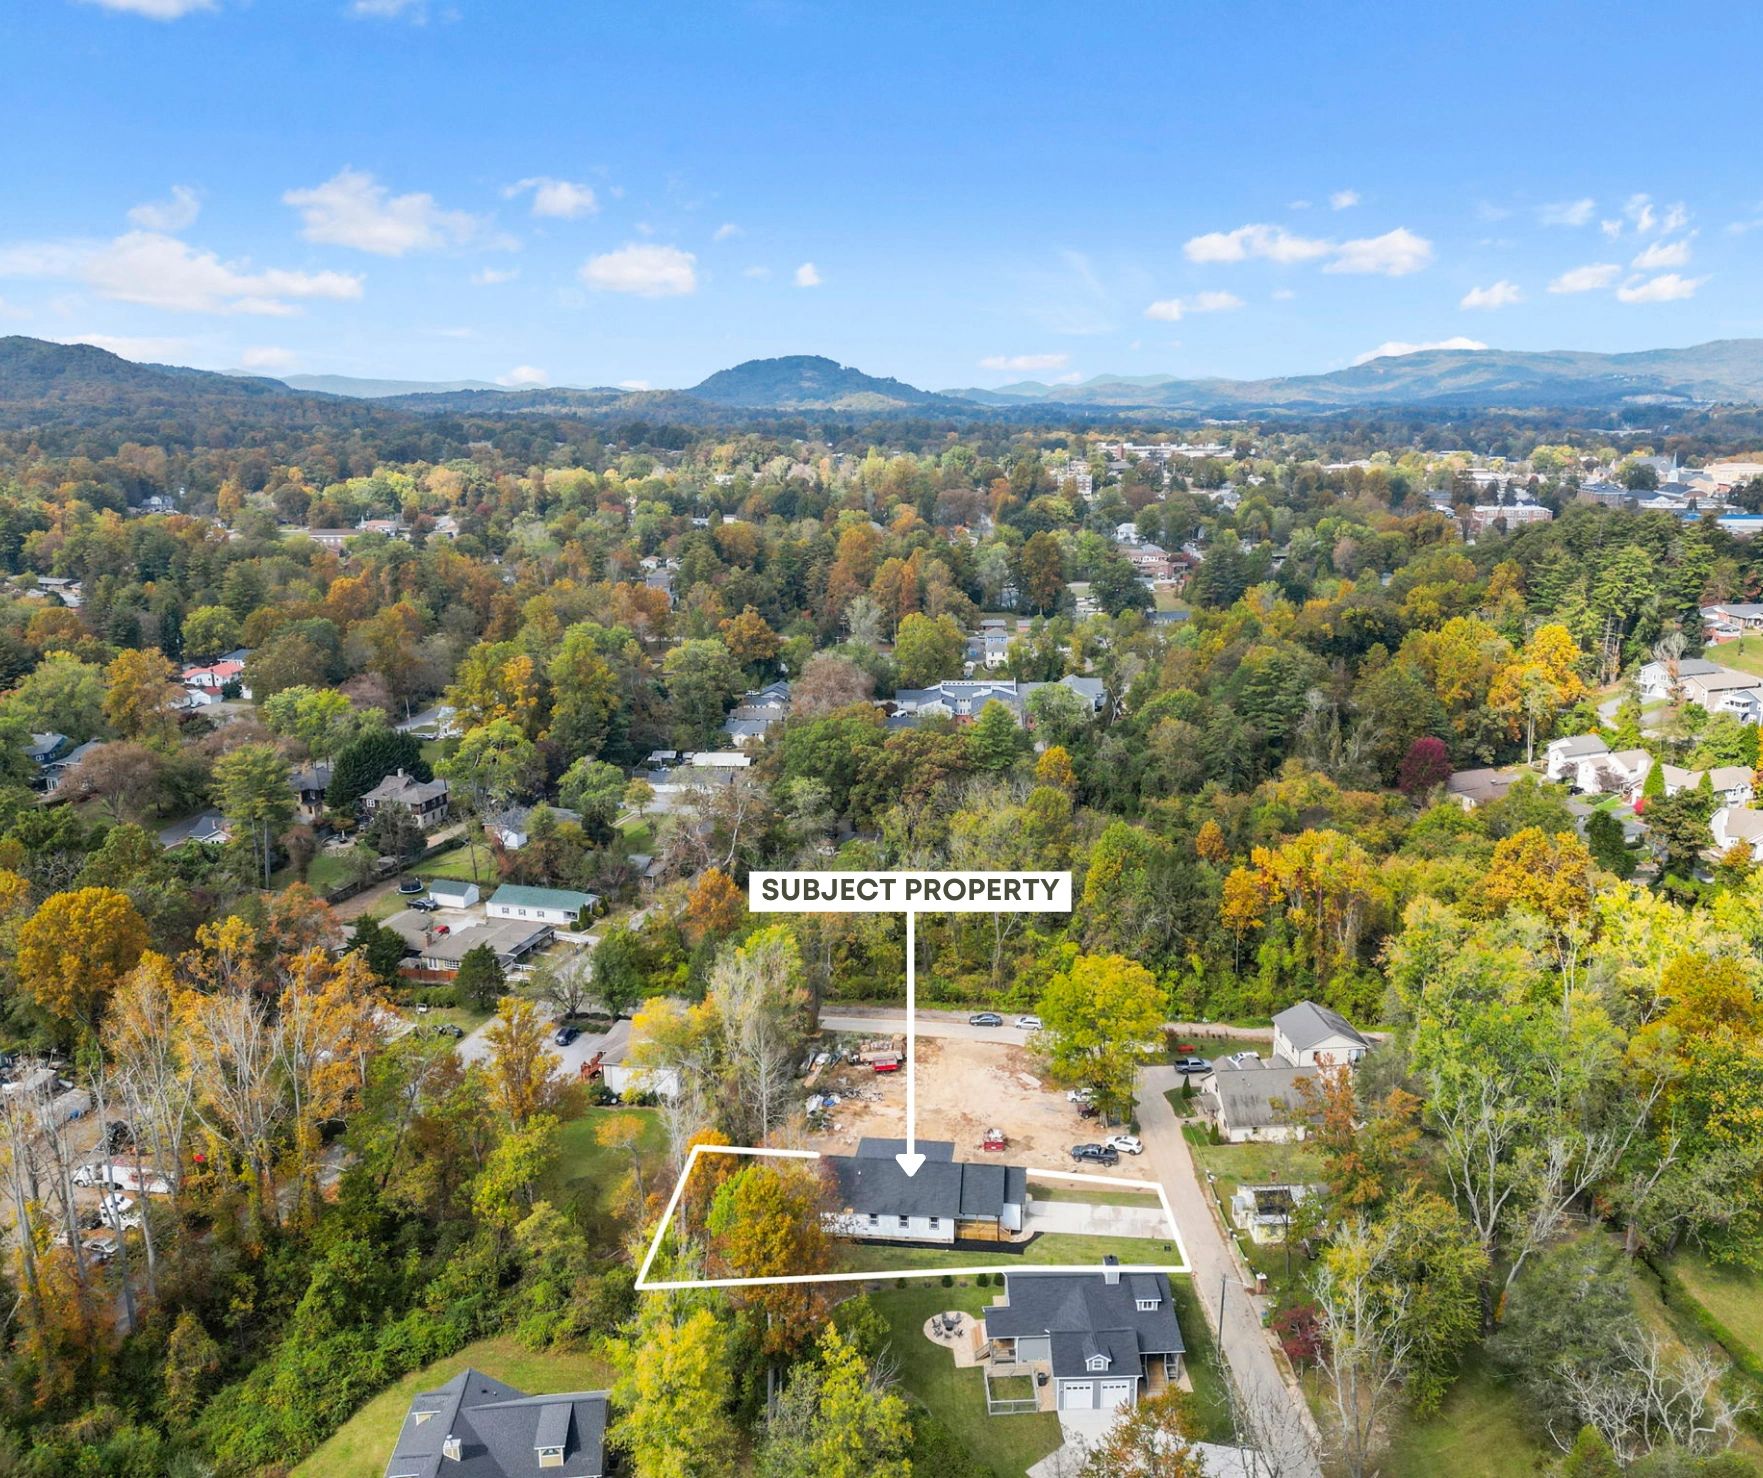 Hendersonville New Construction Drone Photo with Property Outline and Mountain Views